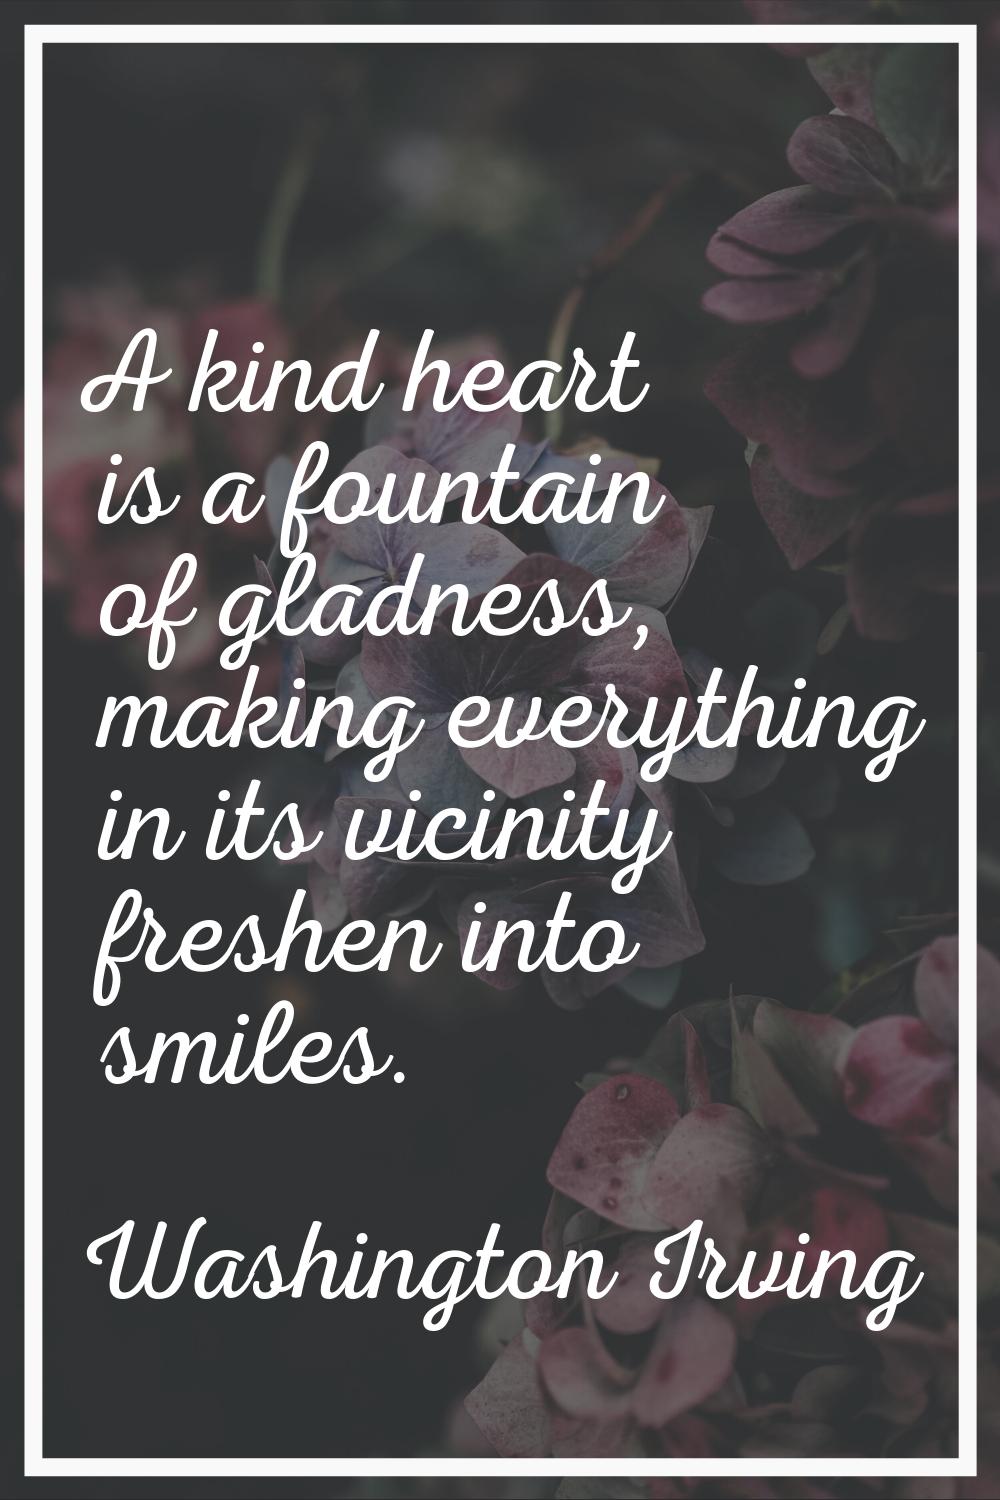 A kind heart is a fountain of gladness, making everything in its vicinity freshen into smiles.